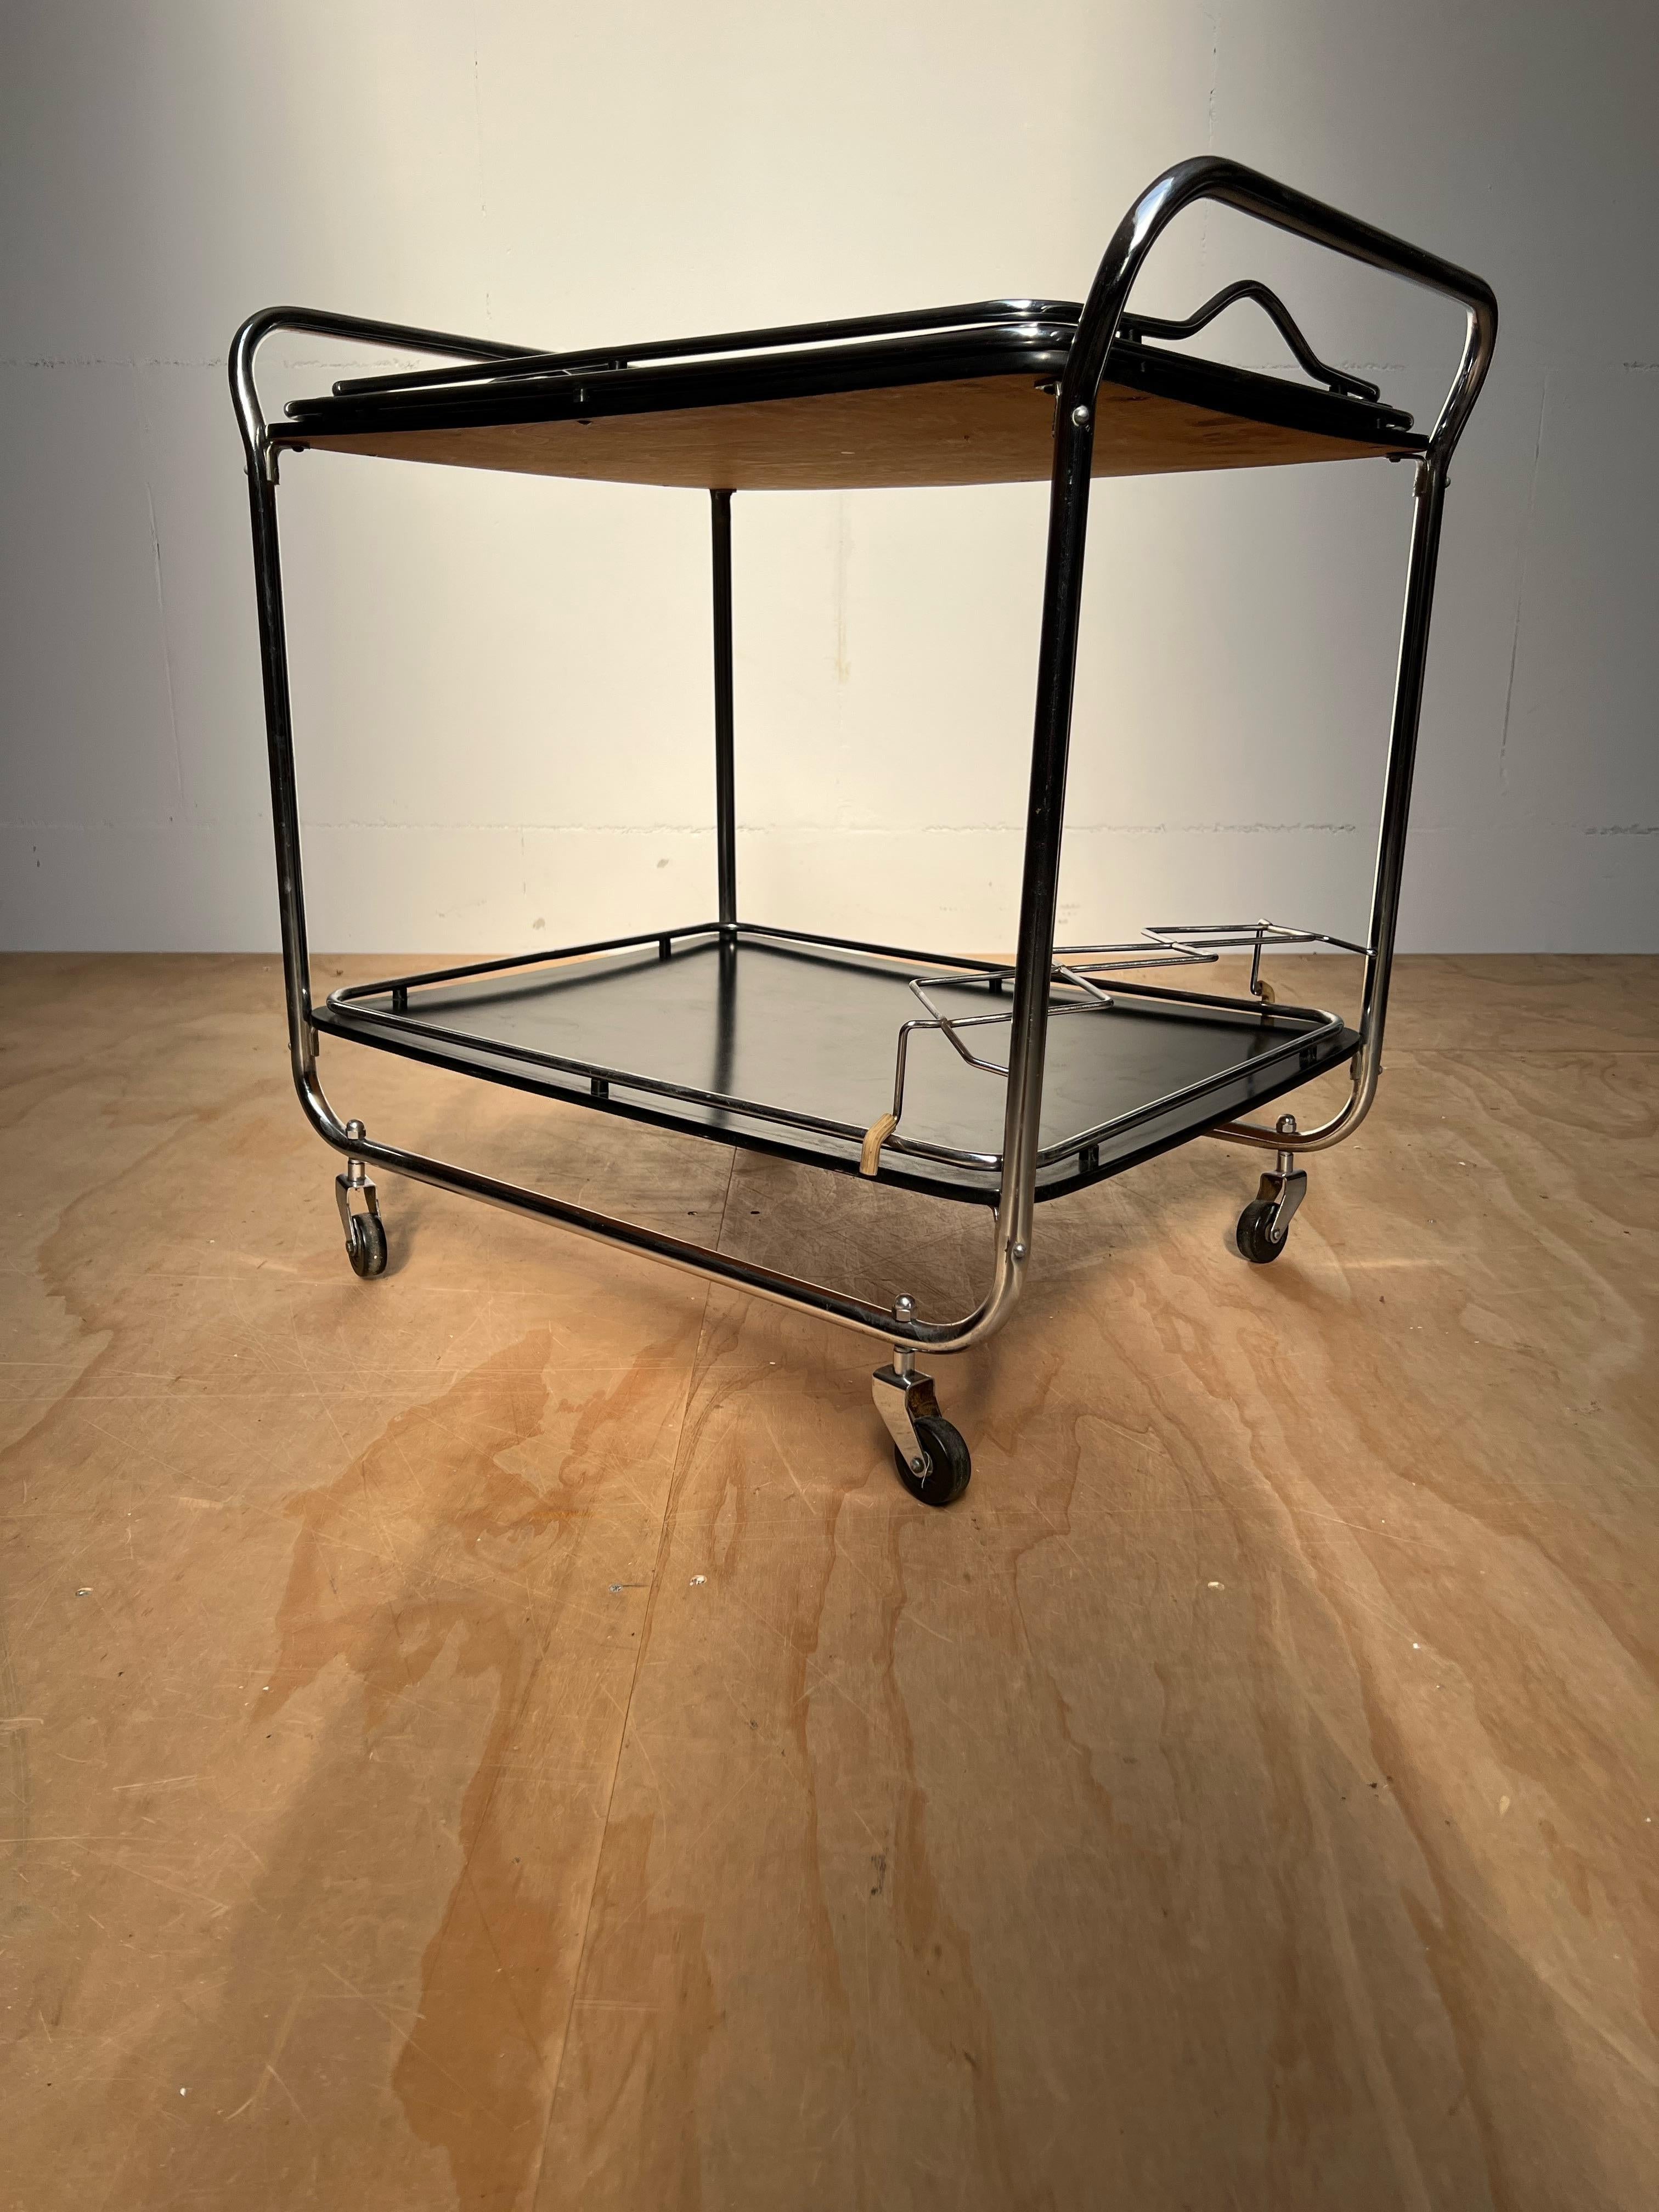 20th Century Midcentury Modern Drinks Trolley / Bar Cart w. Tray, Blackened Wood and Chrome For Sale